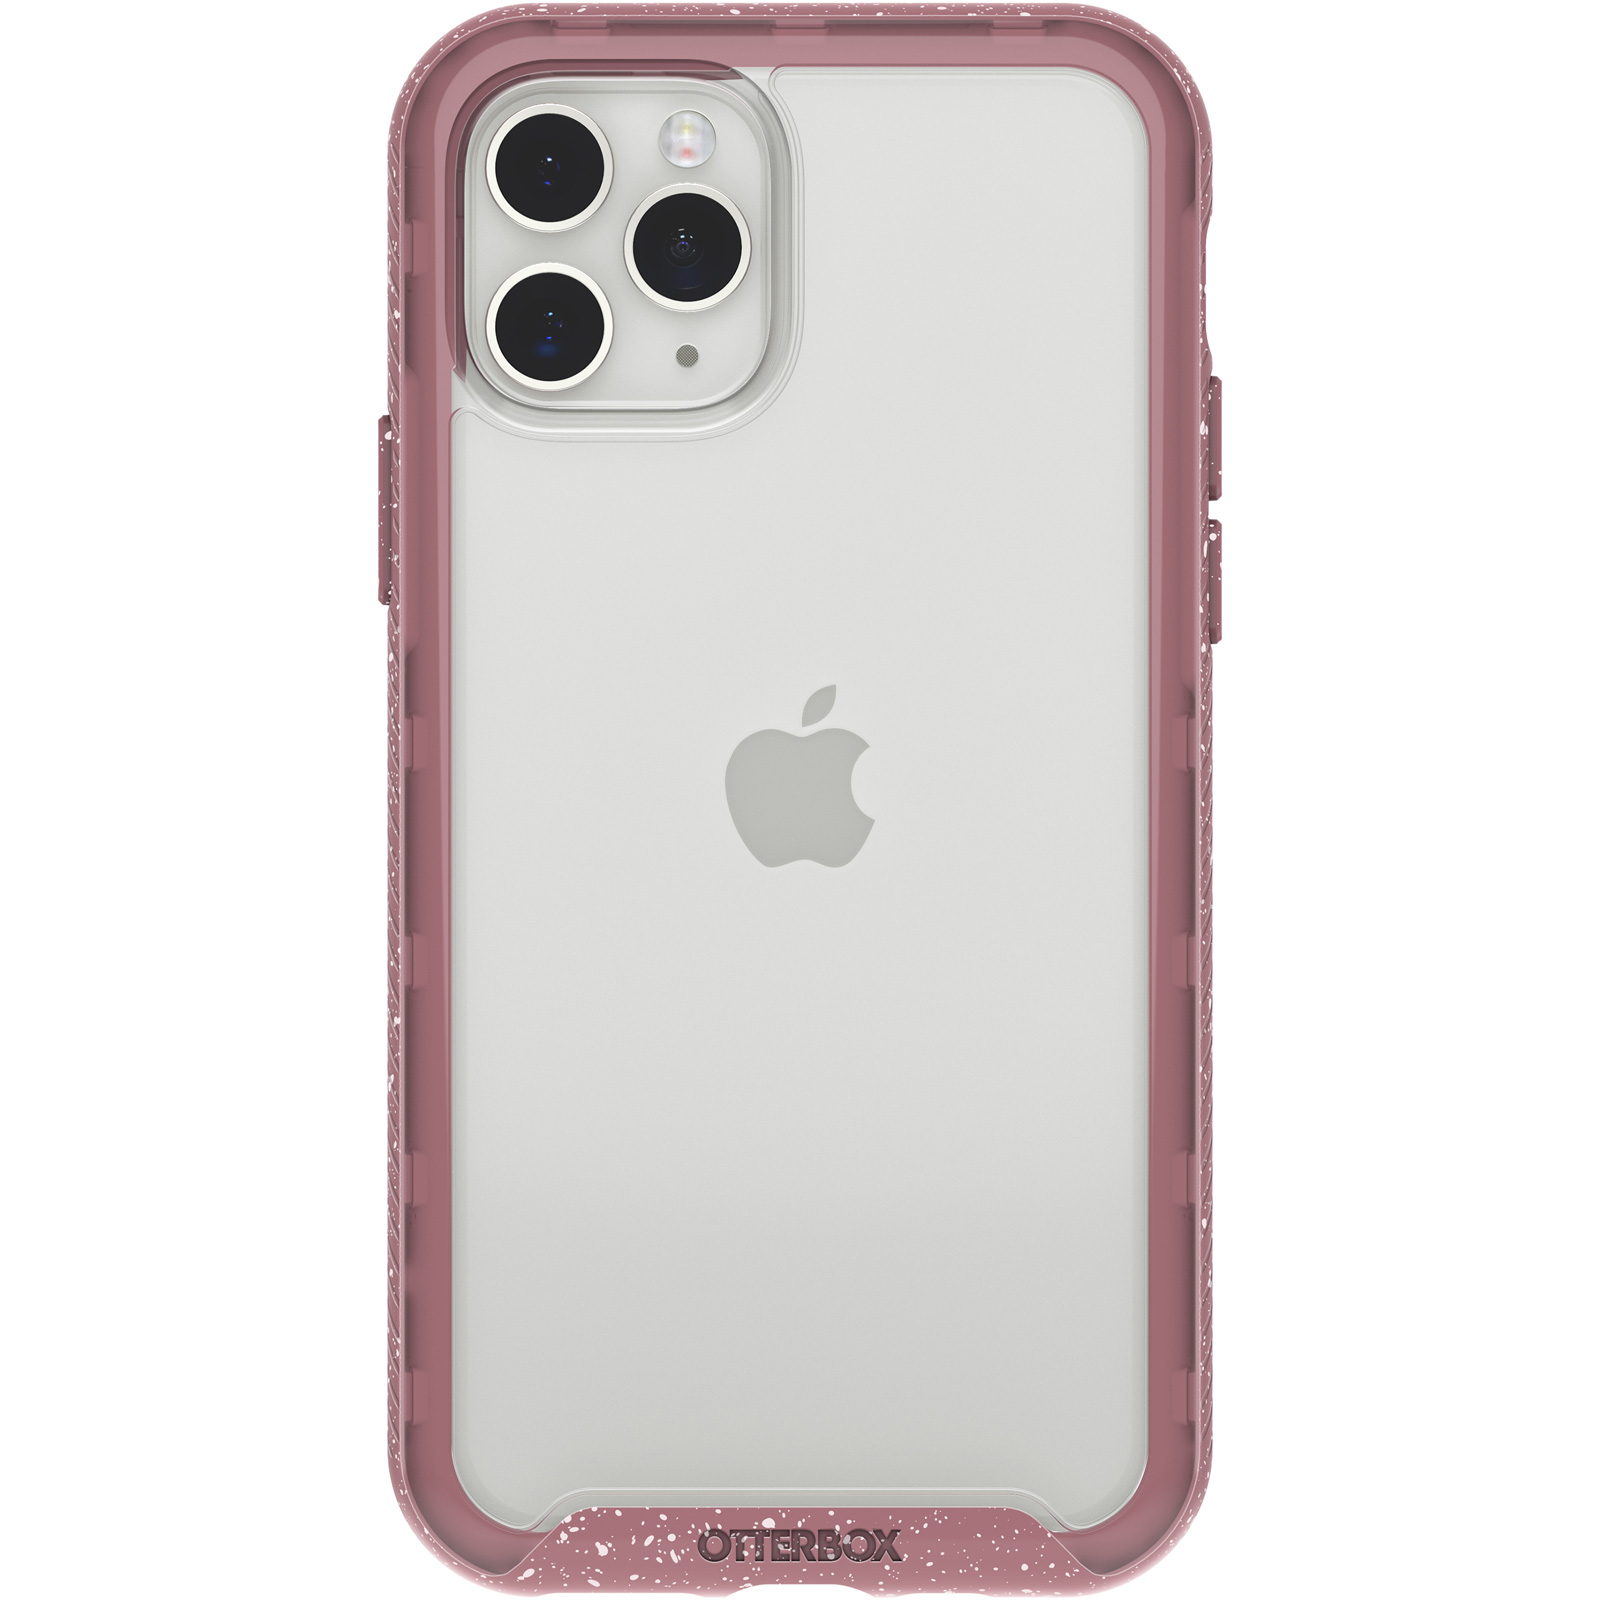 iPhone 11 Pro Traction Series Case Smash